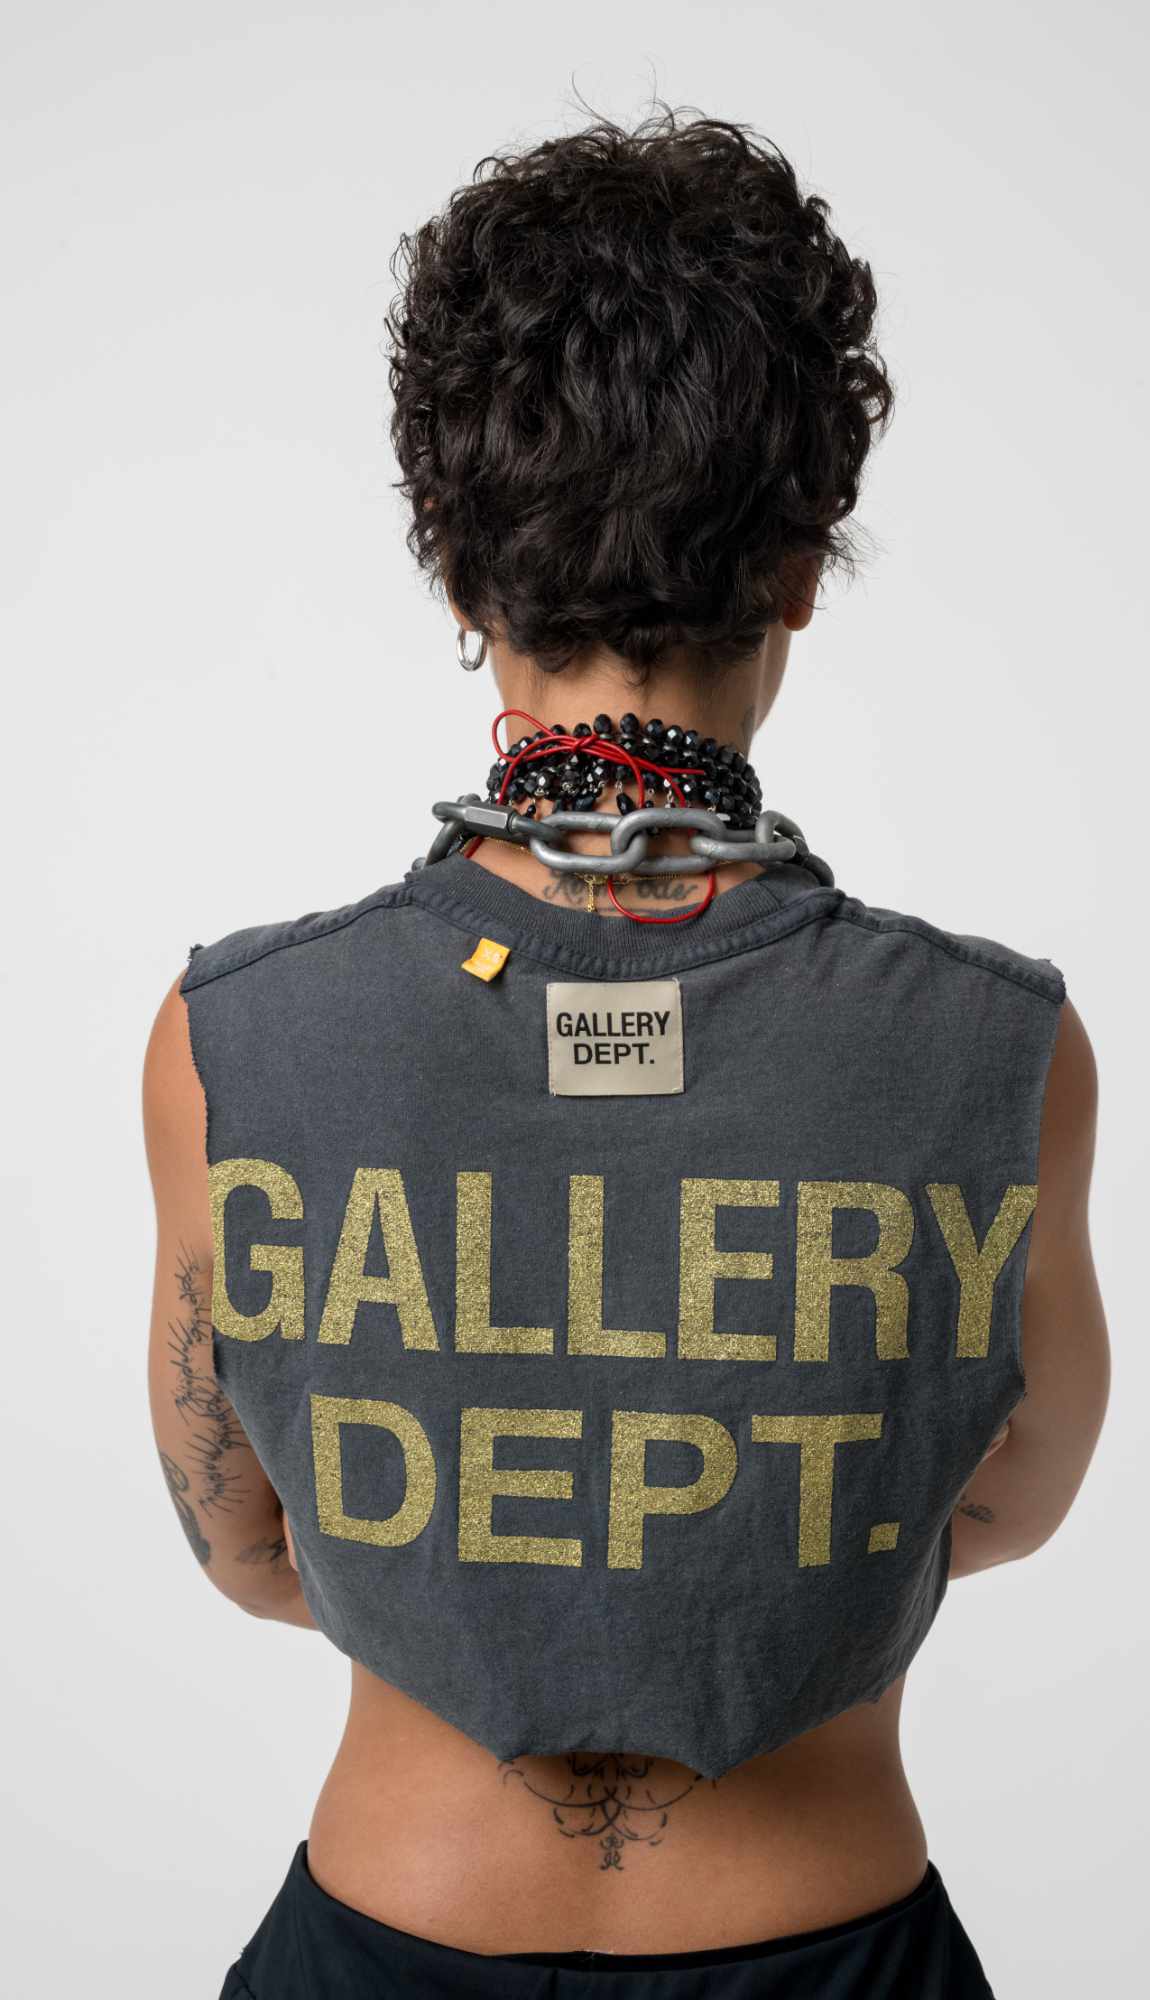 Gallery Dept. founder Josue Thomas debuts Art That Kills with stylized lookbook, editorial & merch